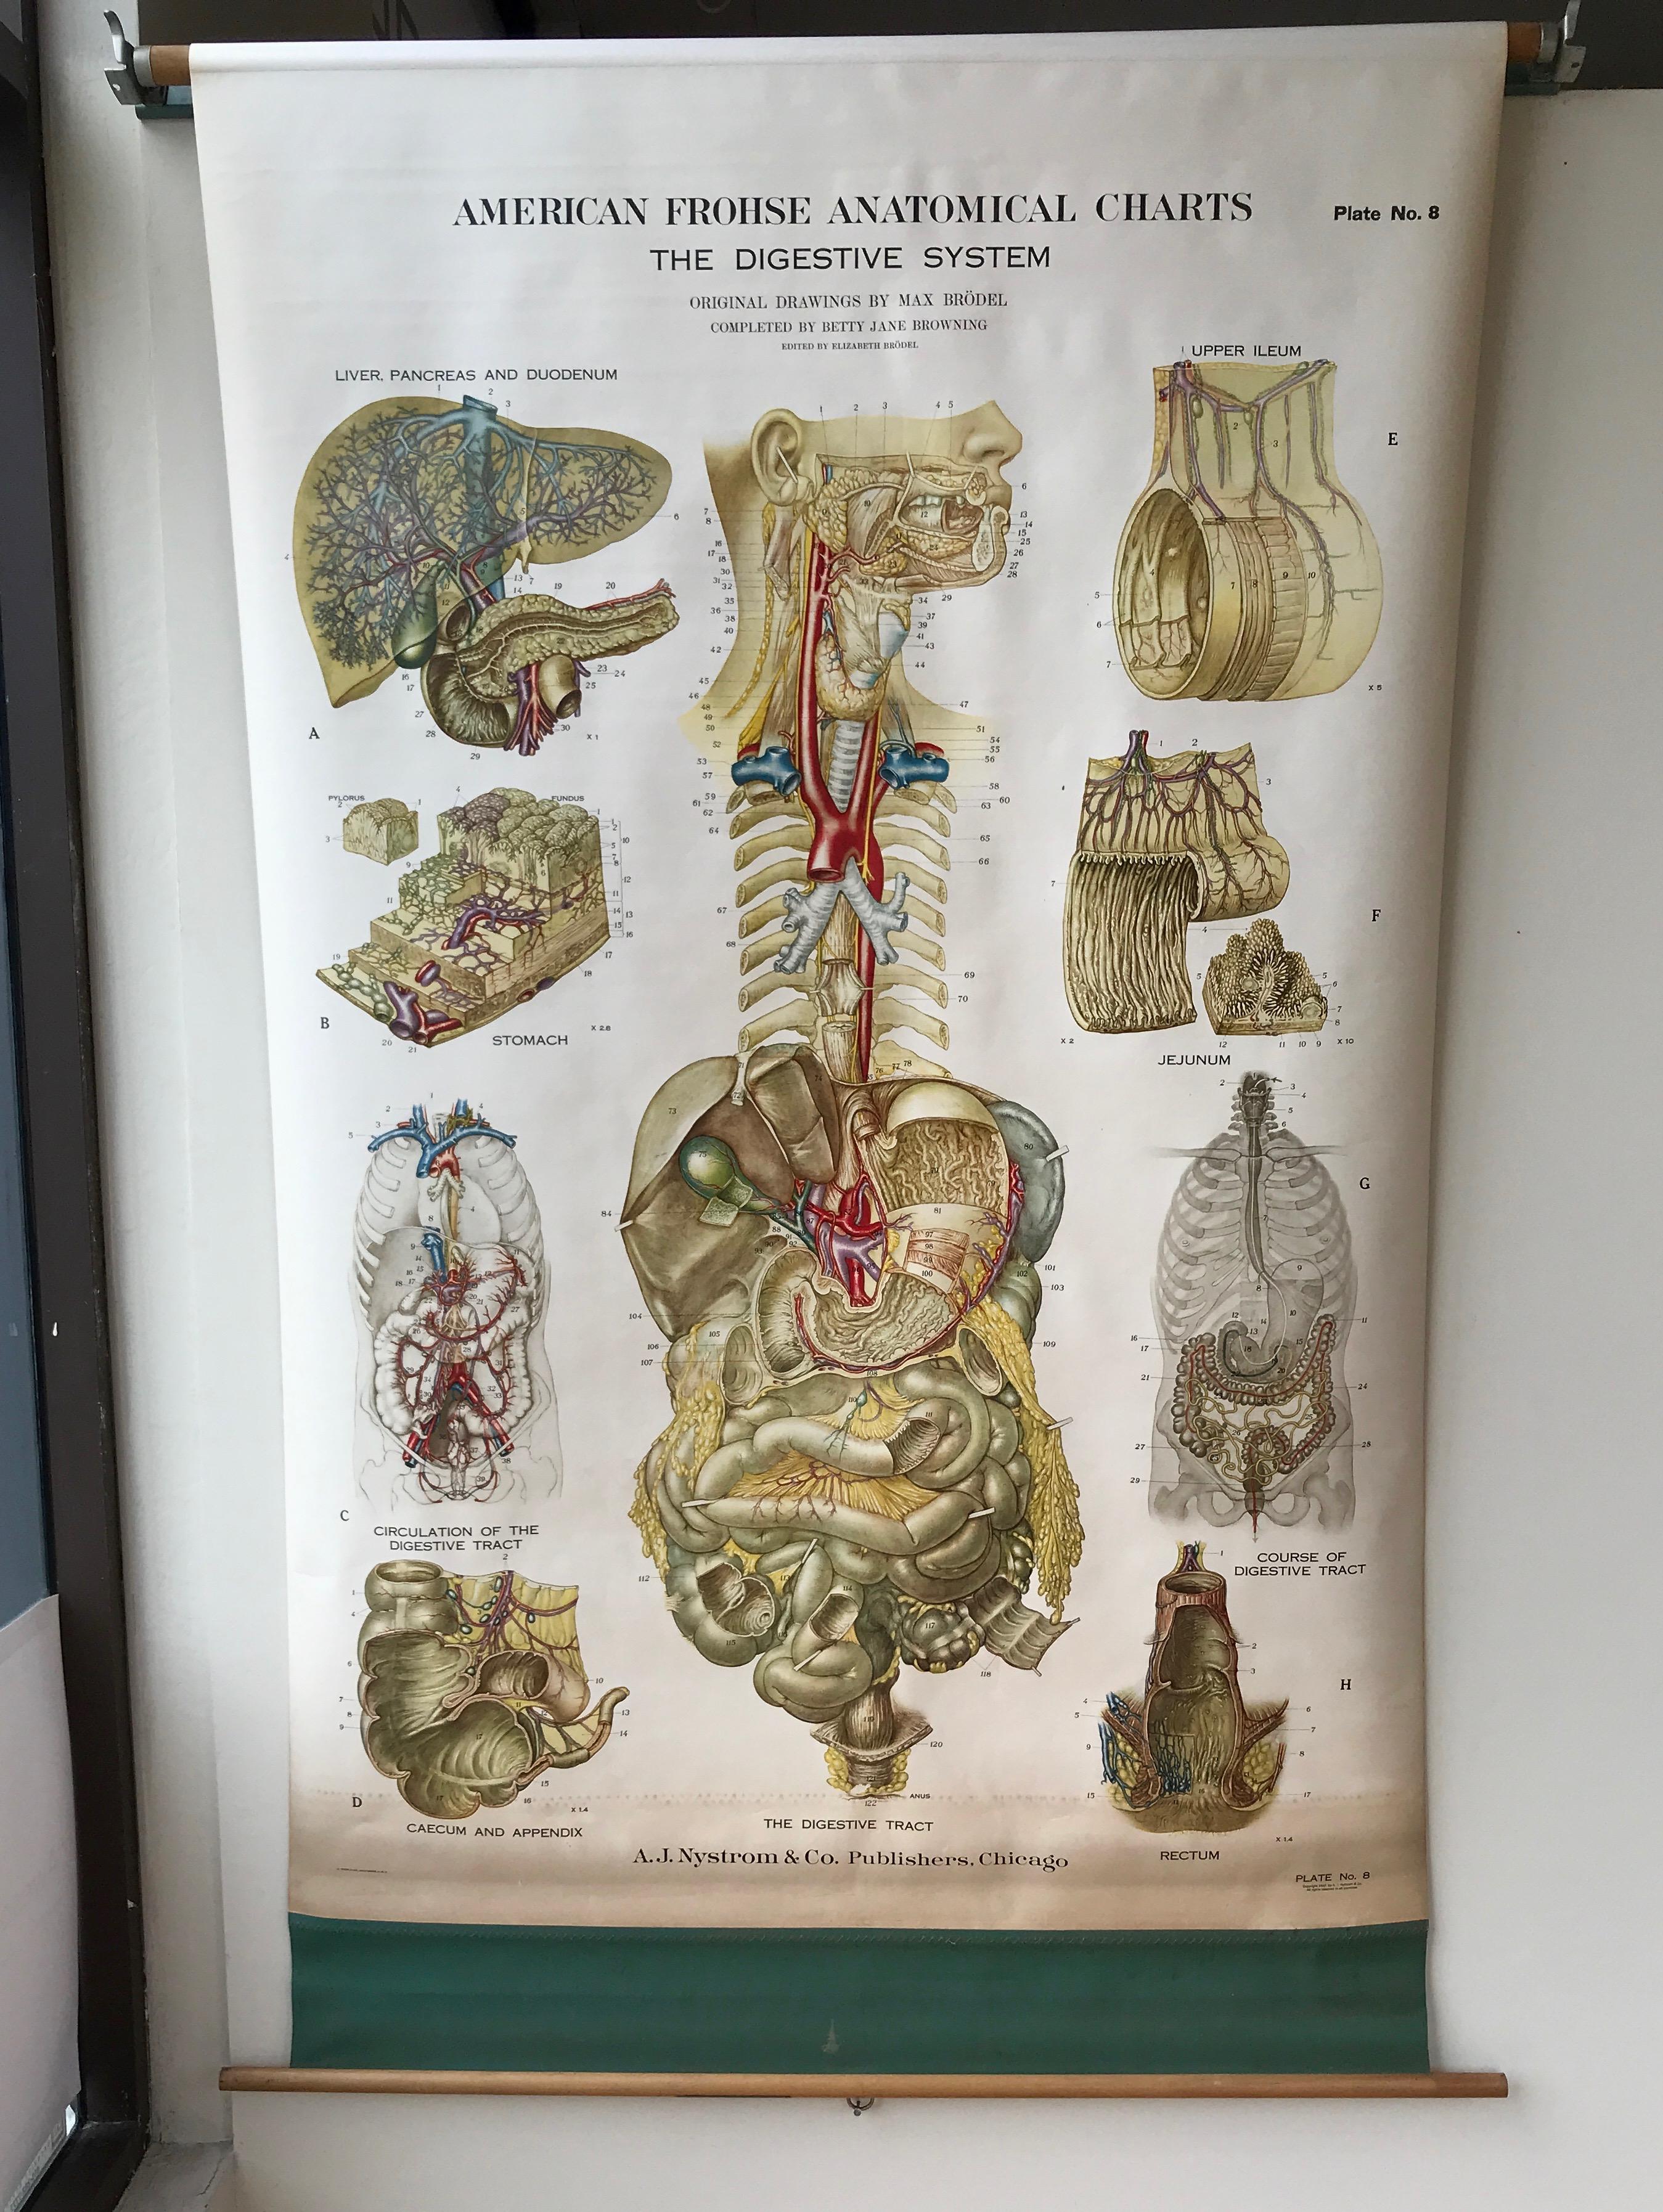 An impressively sized and meticulously executed American Frohse pulldown anatomical chart depicting the human digestive system, published by A.J. Nystrom & Co., Chicago.

Plate No. 8 in an influential series of large, highly detailed color